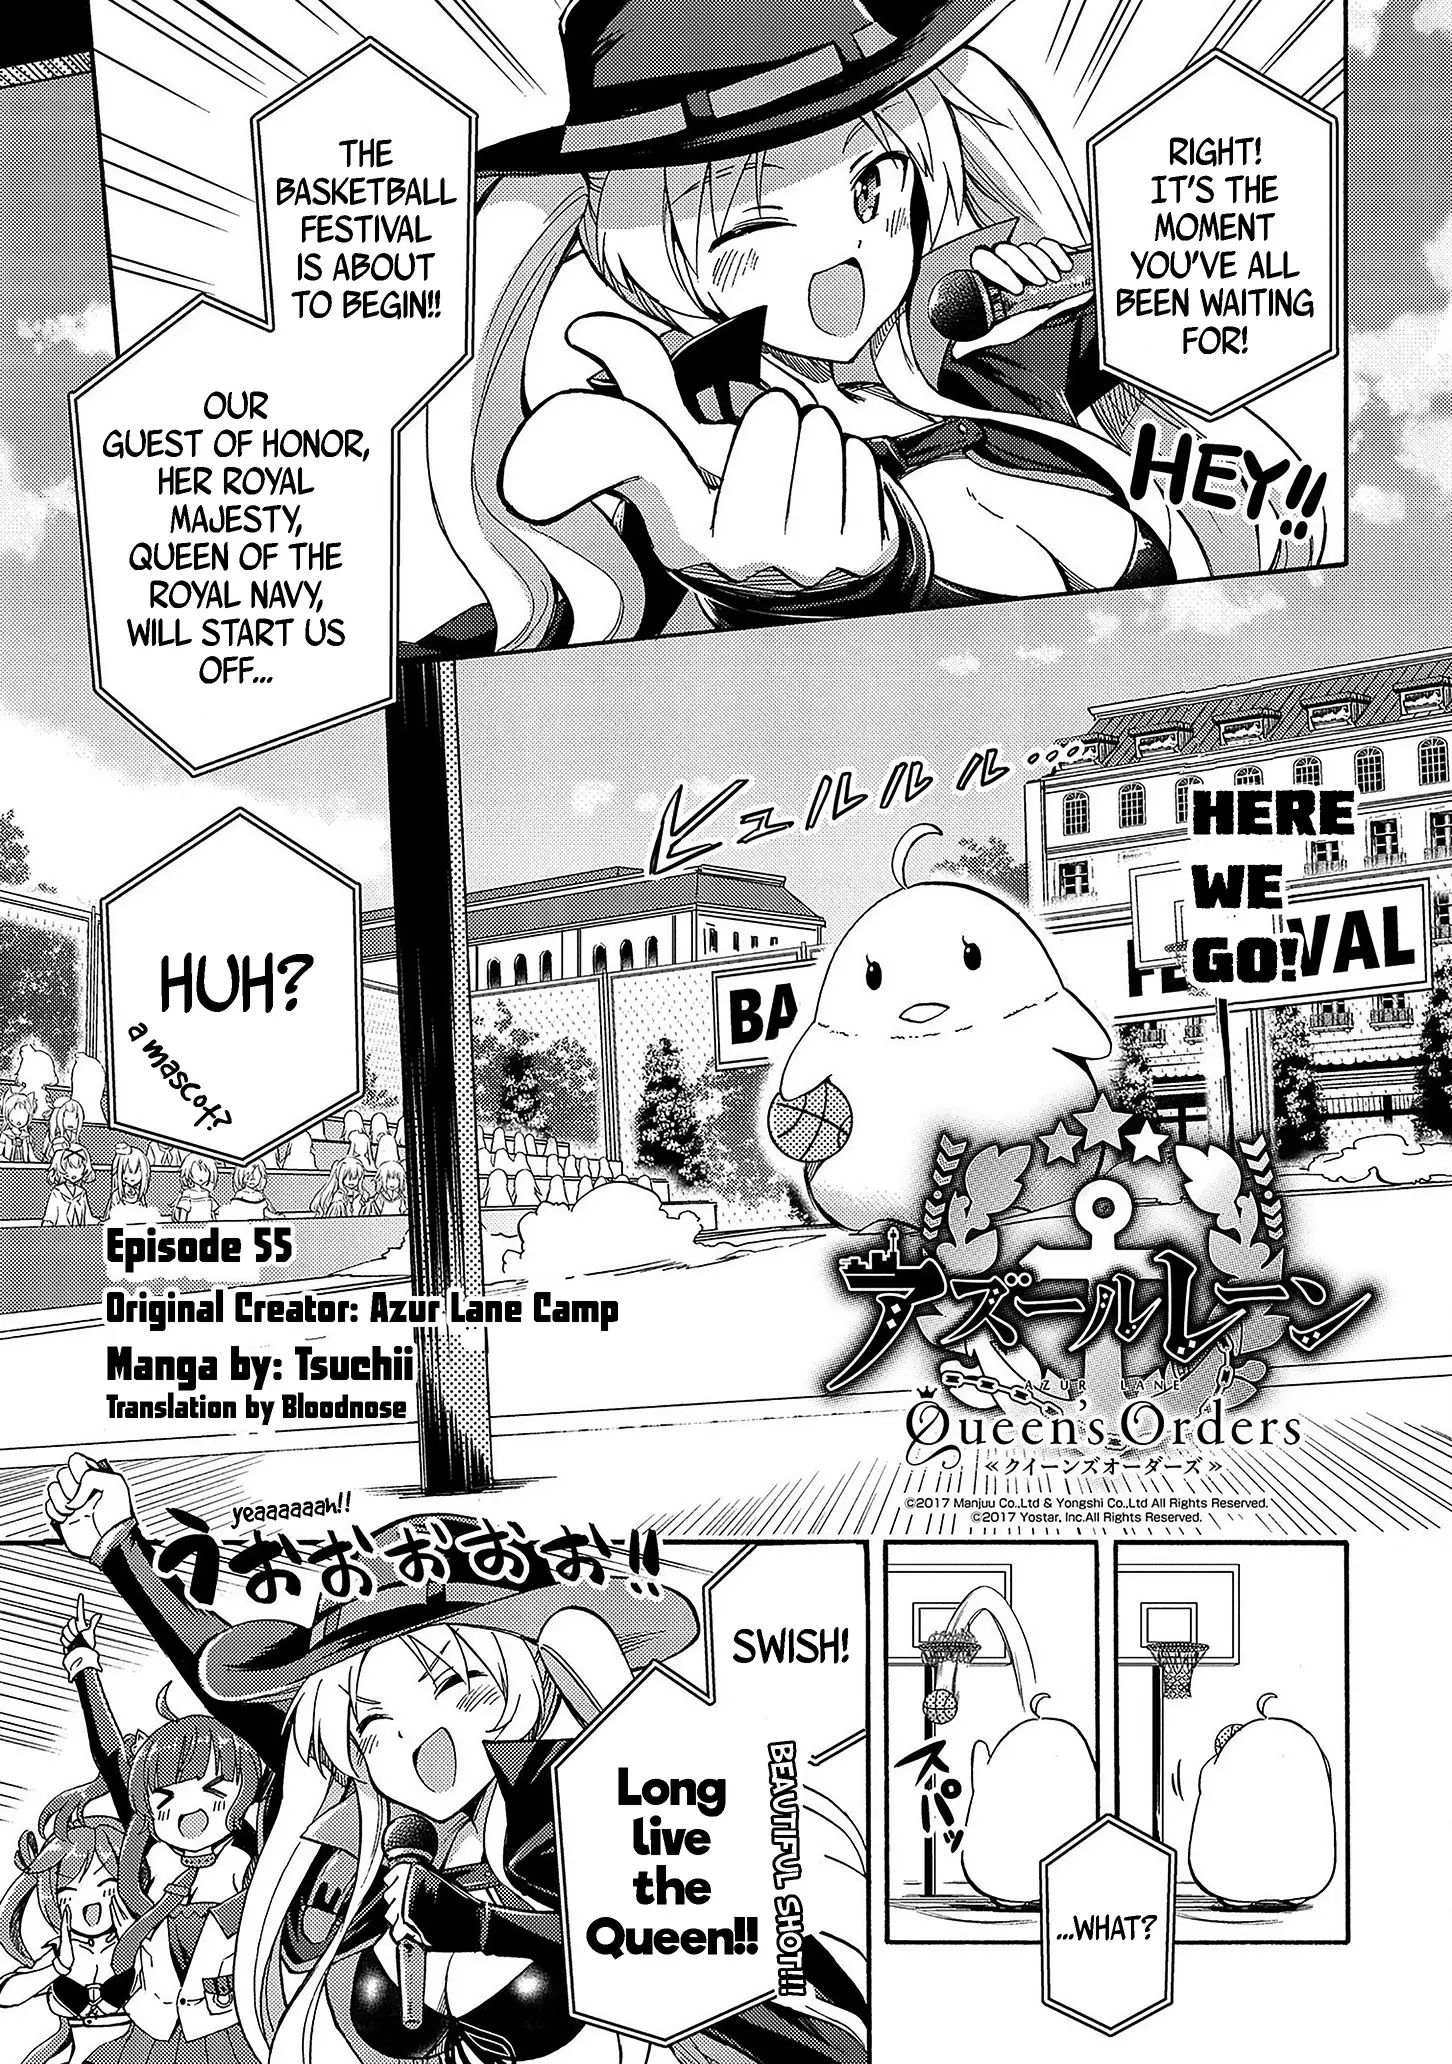 Azur Lane: Queen's Orders - 55 page 1-23afbb54